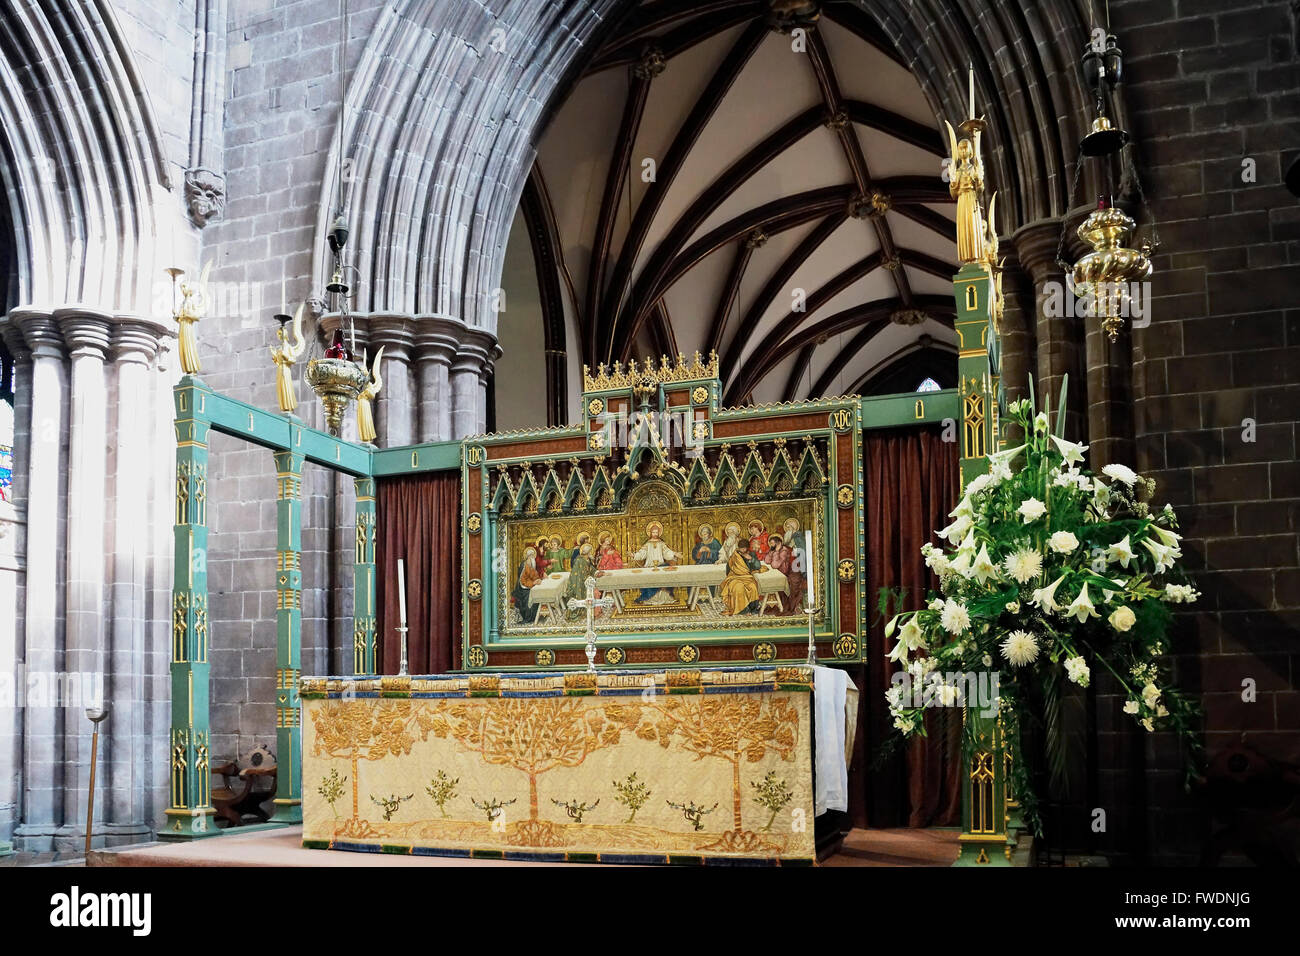 The main altar in Chester Cathedral, Chester, England, United Kingdom. High ISO image. Stock Photo